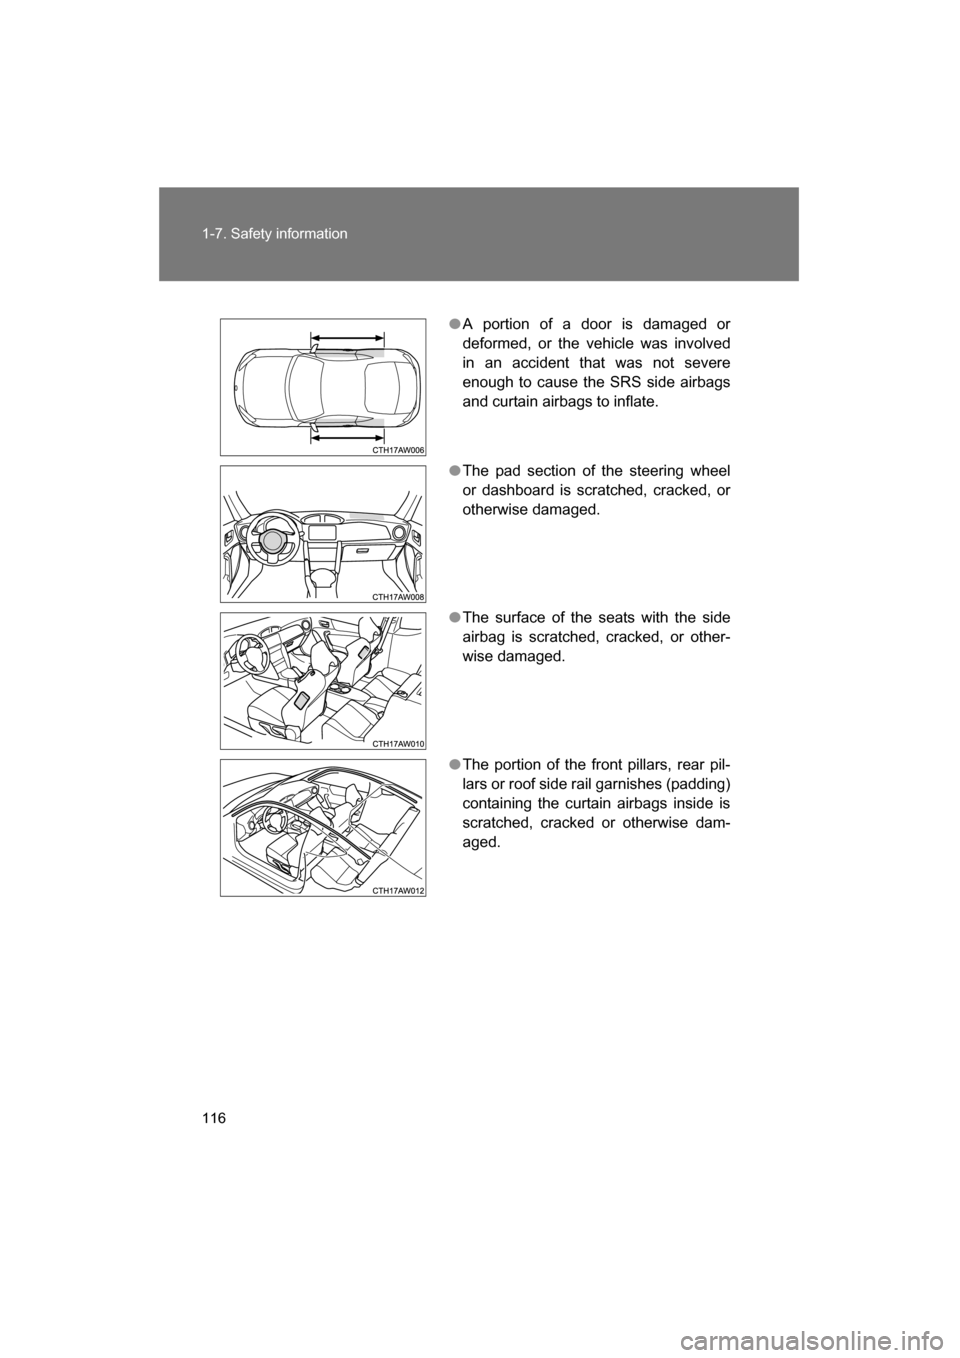 SUBARU BRZ 2015 1.G Owners Manual 116
1-7. Safety information
●A portion of a door is damaged or 
deformed, or the vehicle was involved
in an accident that was not severe
enough to cause the SRS side airbags
and curtain airbags to i